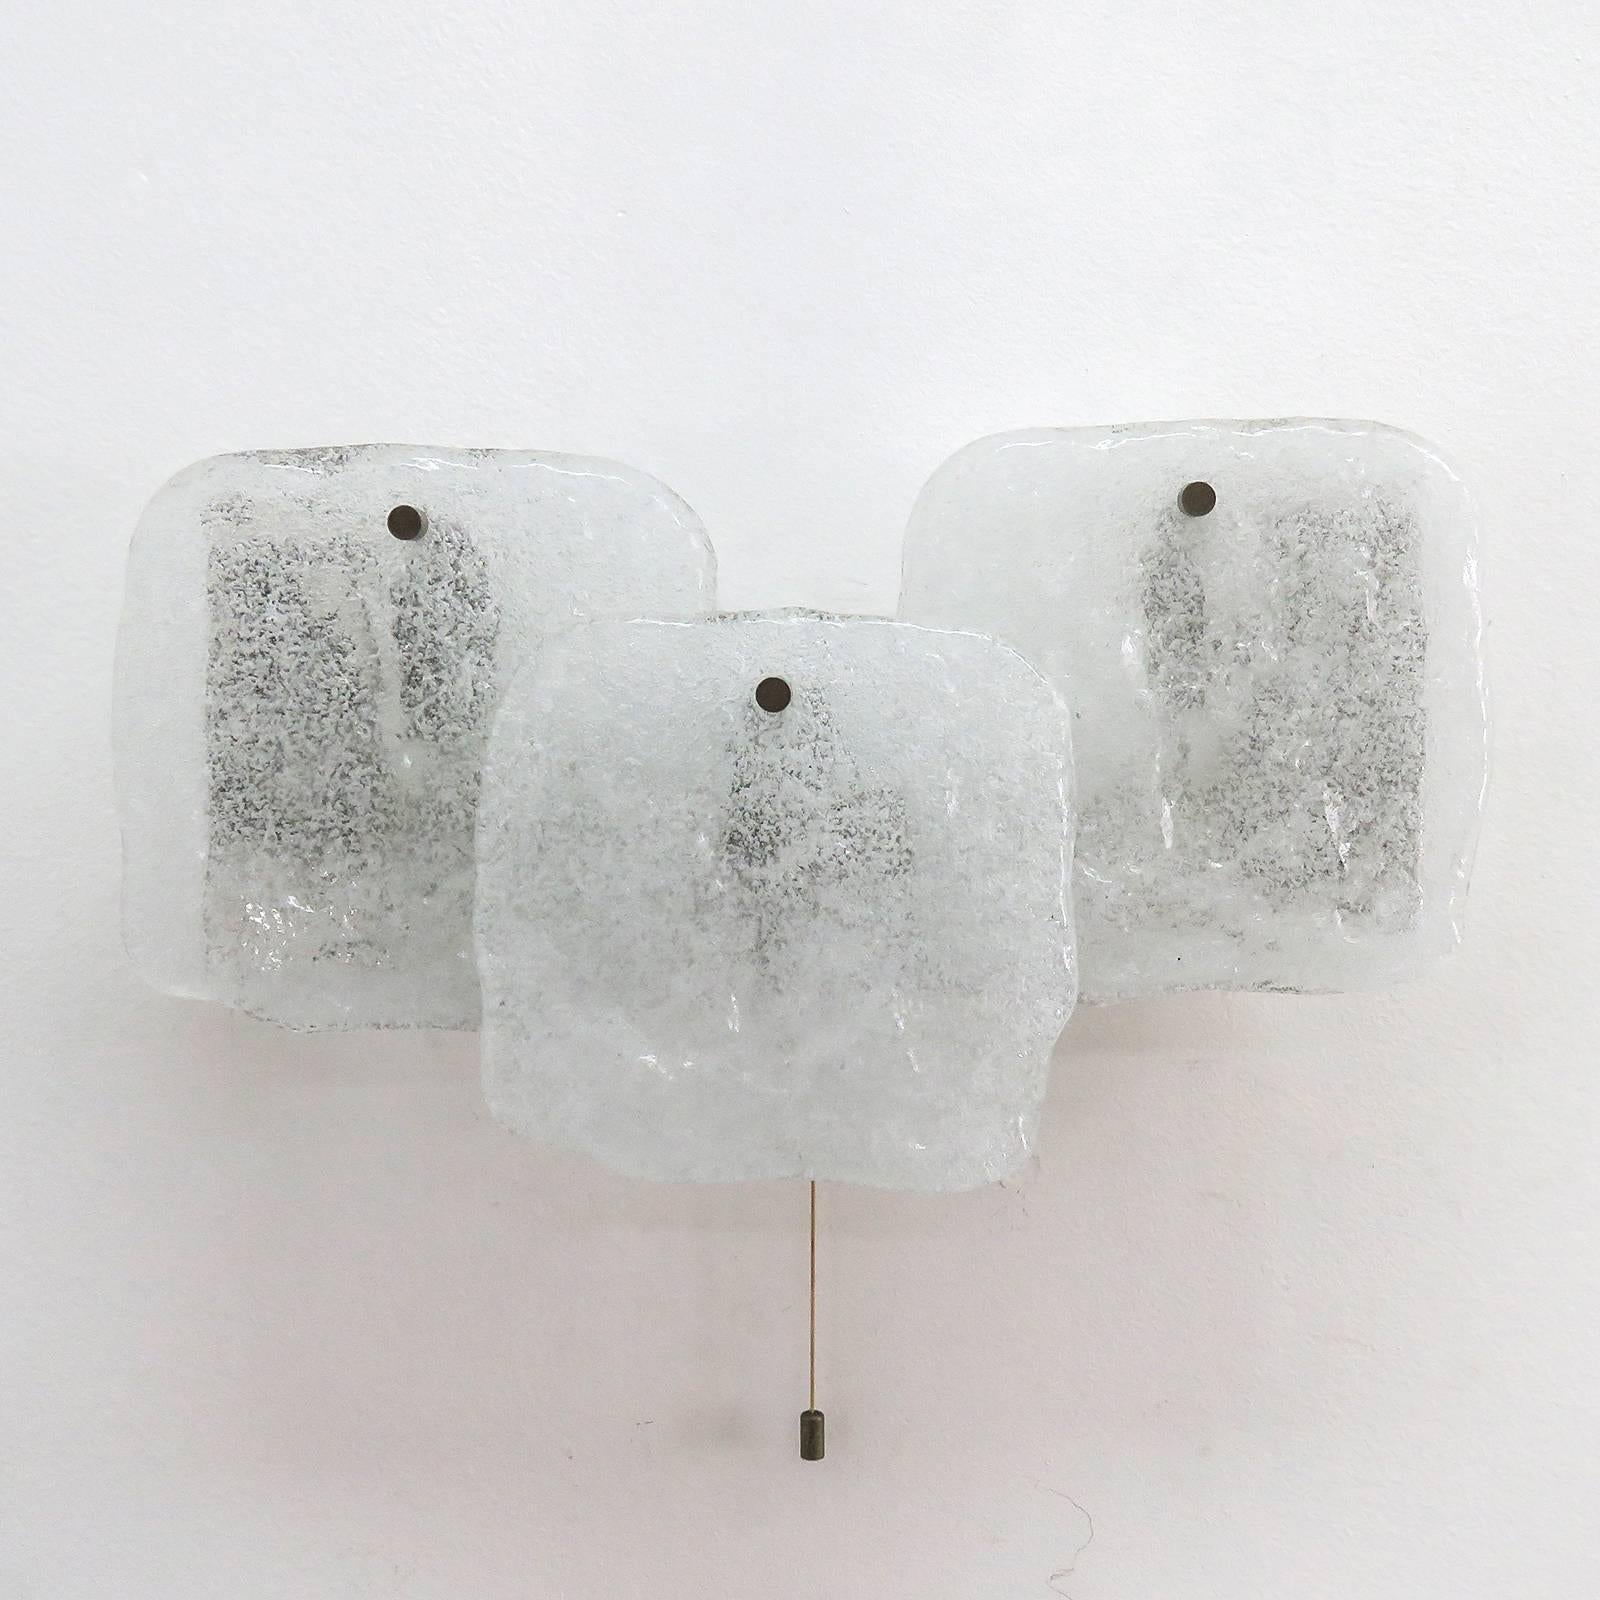 Wonderful ice glass wall lights by Kalmar Franken, Austria in the 1960s and panels with three square ice glass pieces (7 inch x 7 inch) with marginal patina on the nickel-plated metal bases, three sockets and an individual on/off pull string switch